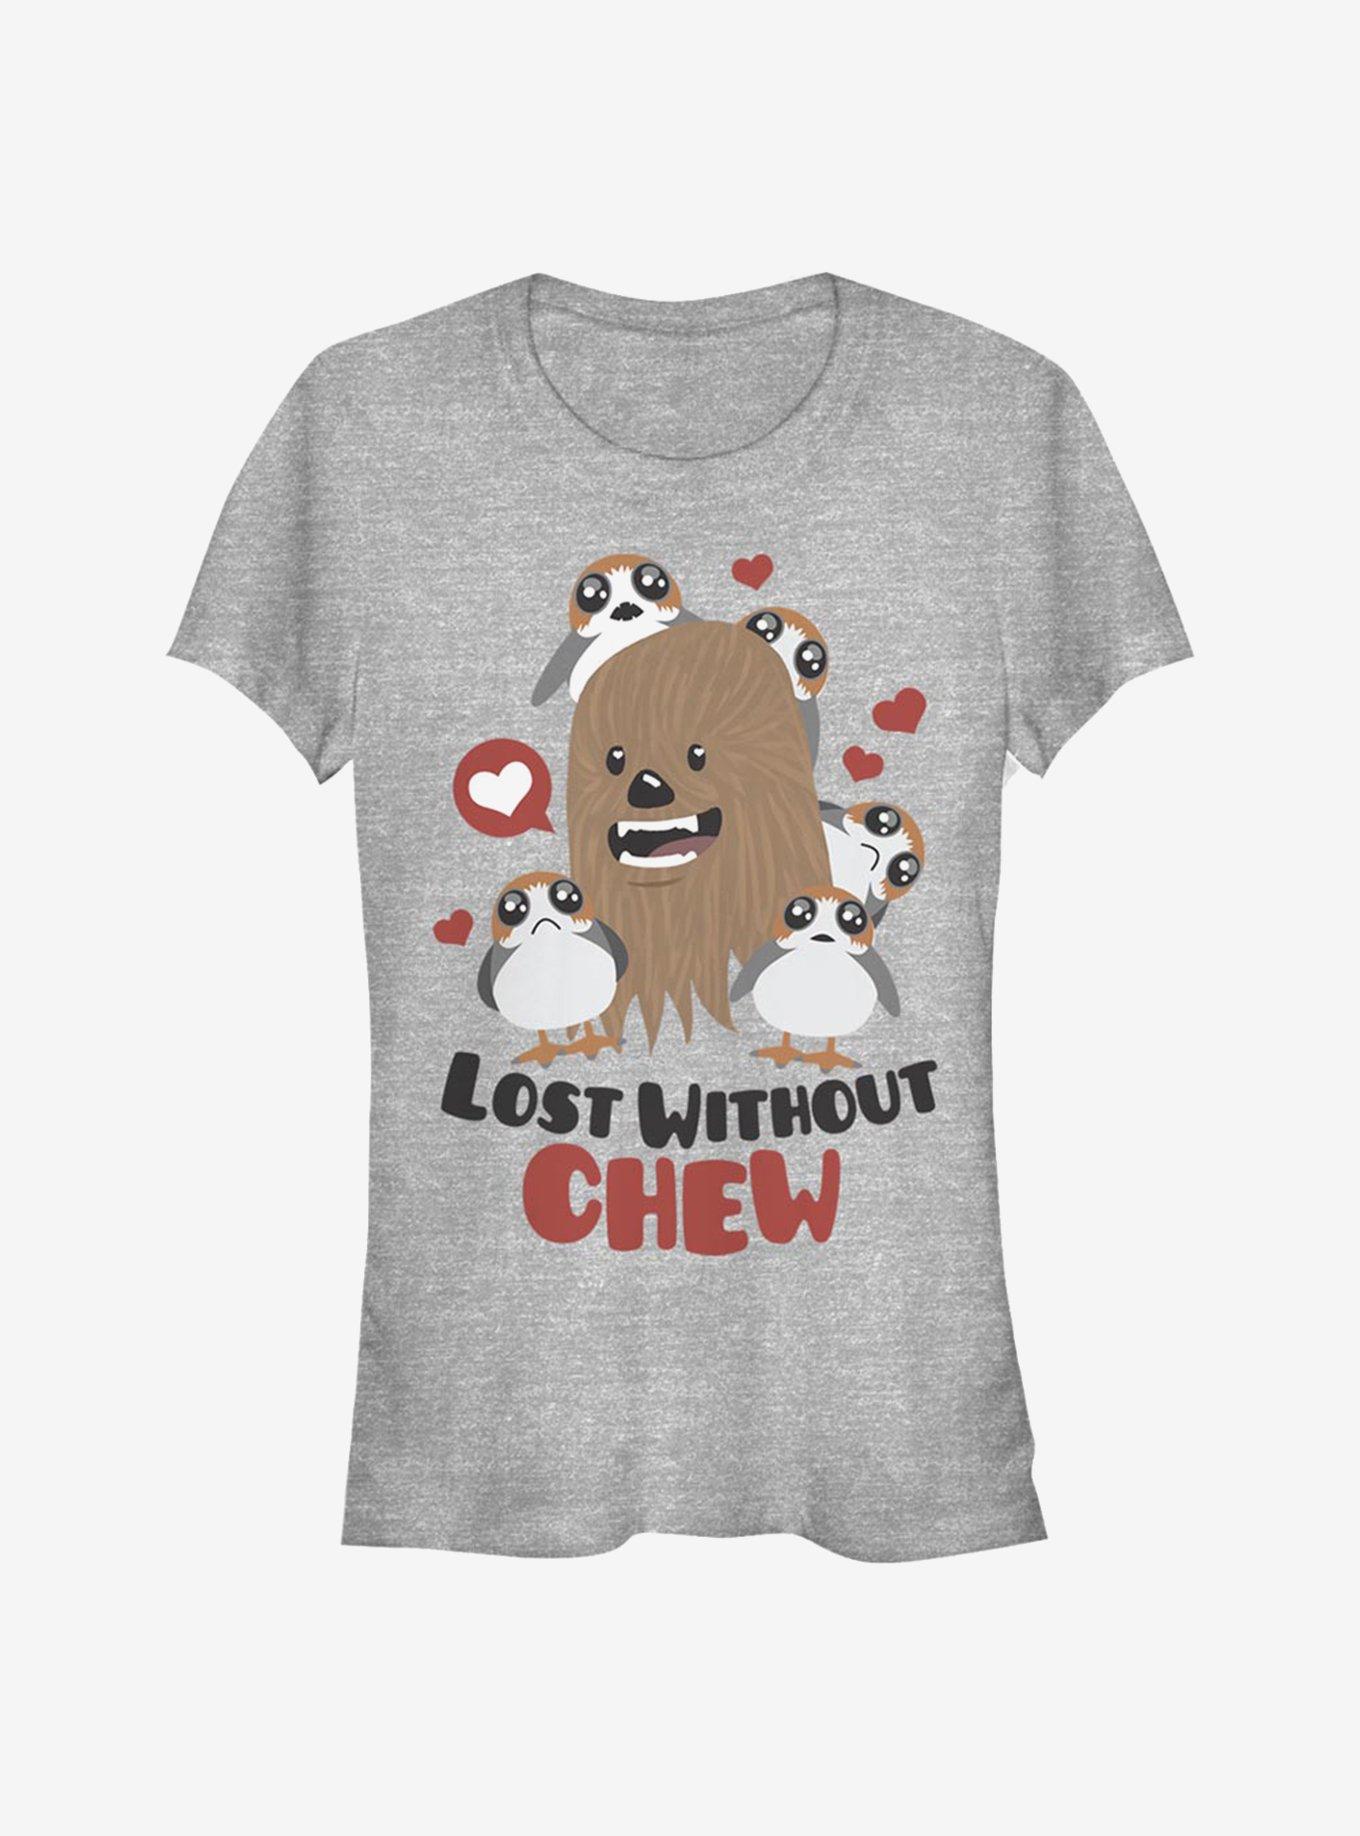 Star Wars Episode VIII The Last Jedi Lost Without Chew Girls T-Shirt, ATH HTR, hi-res